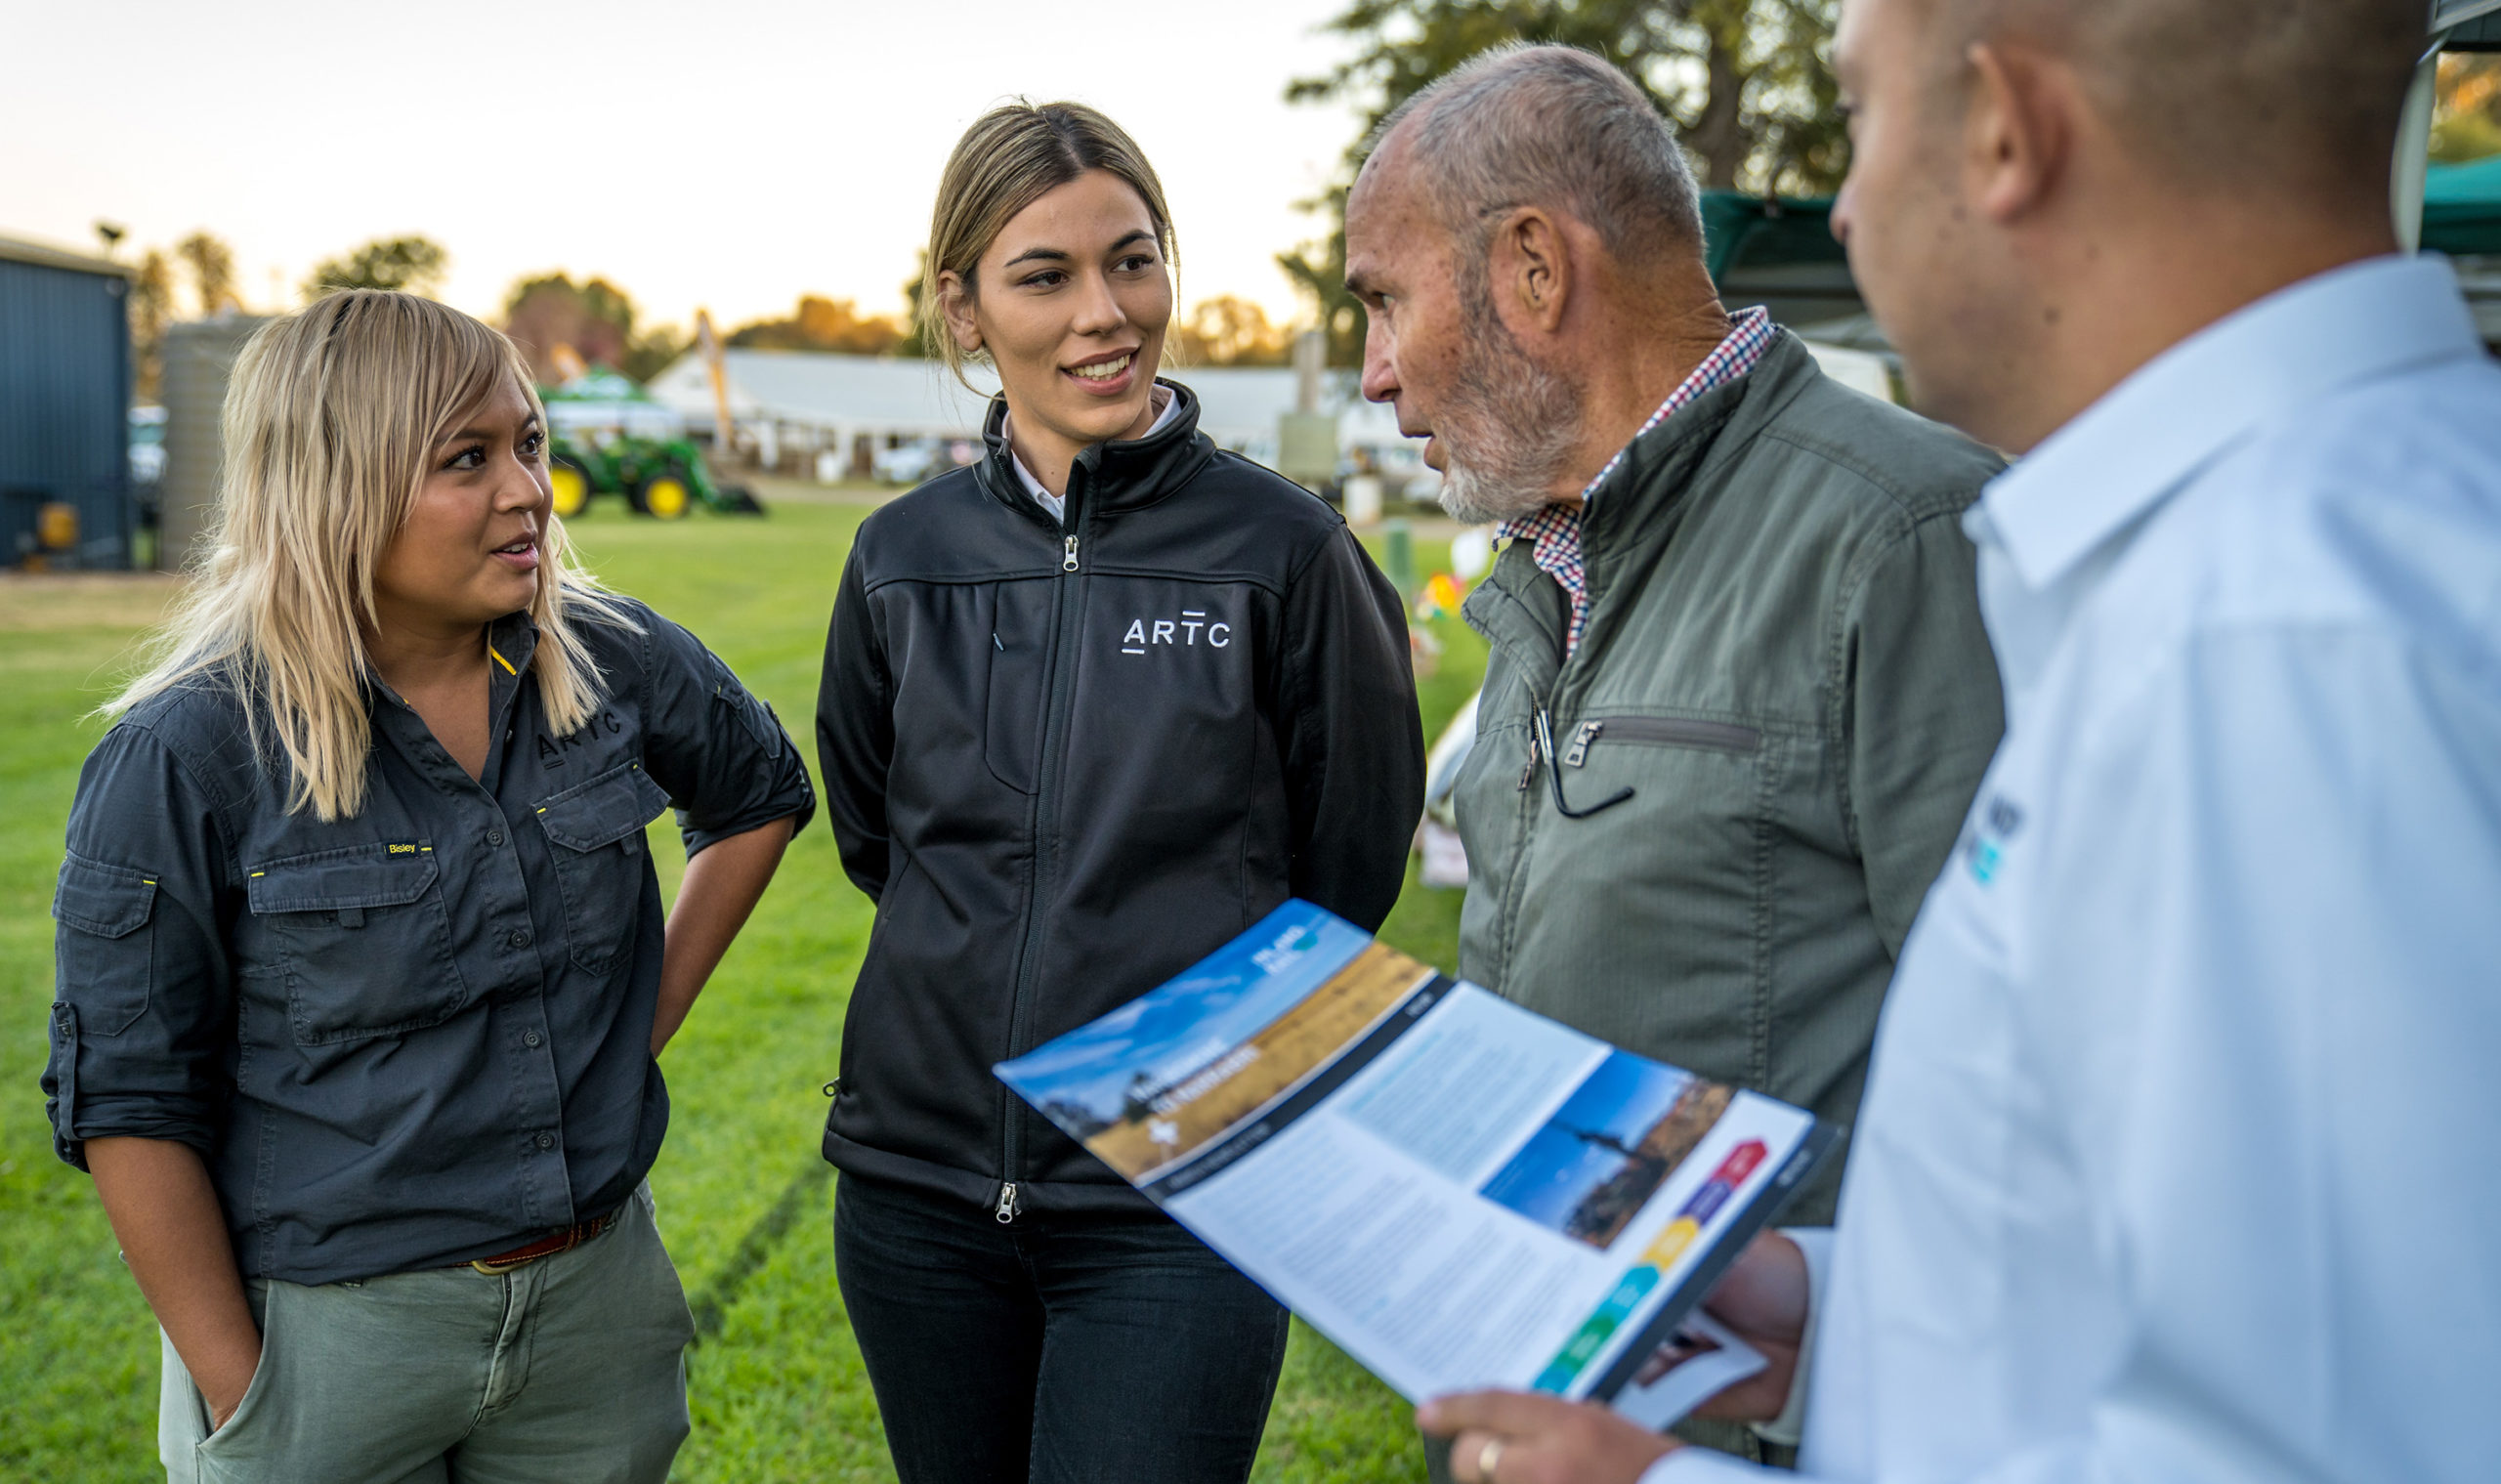 The Stakeholder Engagement team talking to a local man at the 2019 Coonamble Show, New South Wales